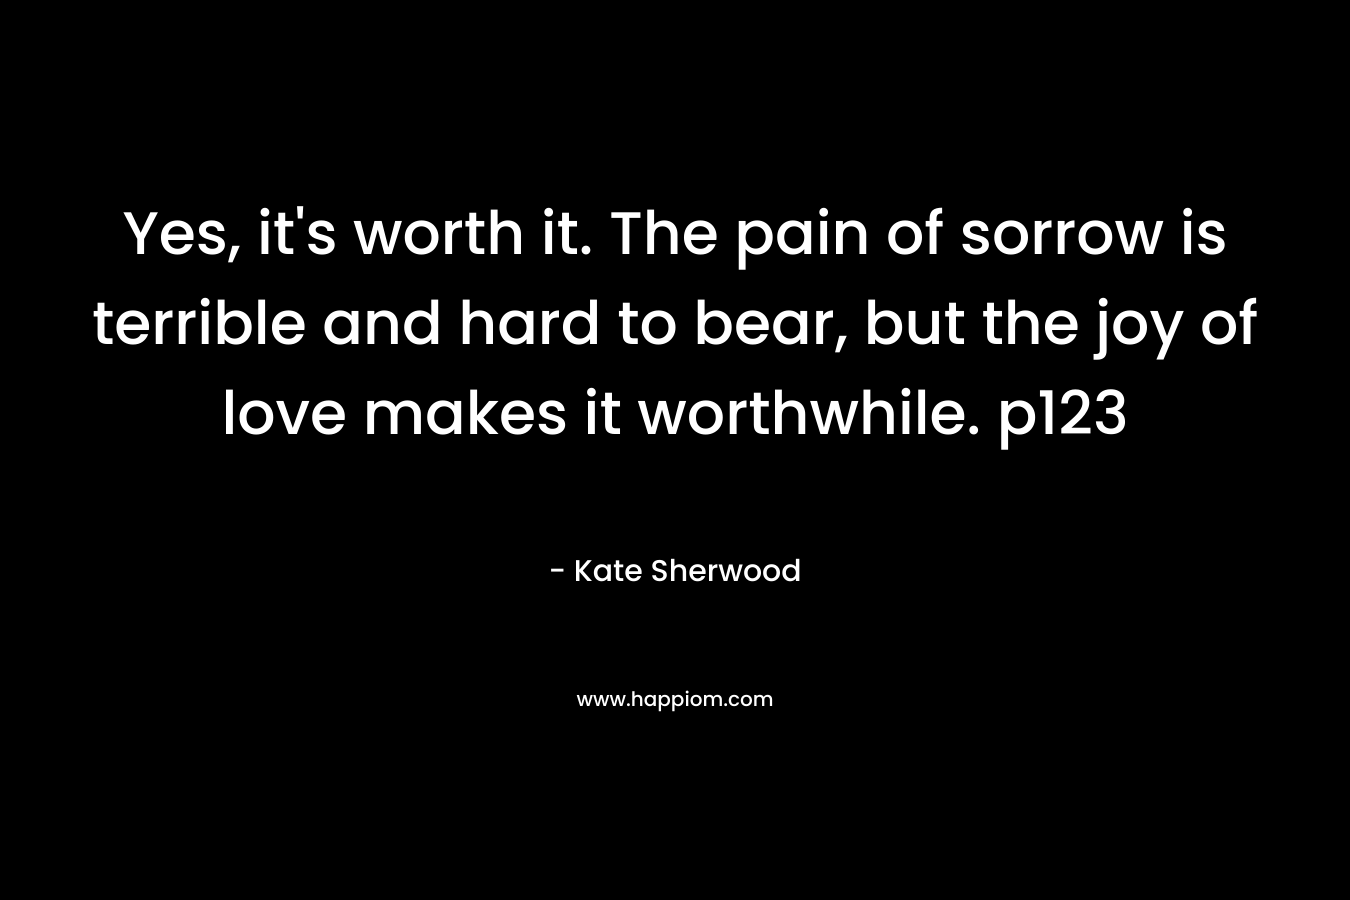 Yes, it's worth it. The pain of sorrow is terrible and hard to bear, but the joy of love makes it worthwhile. p123